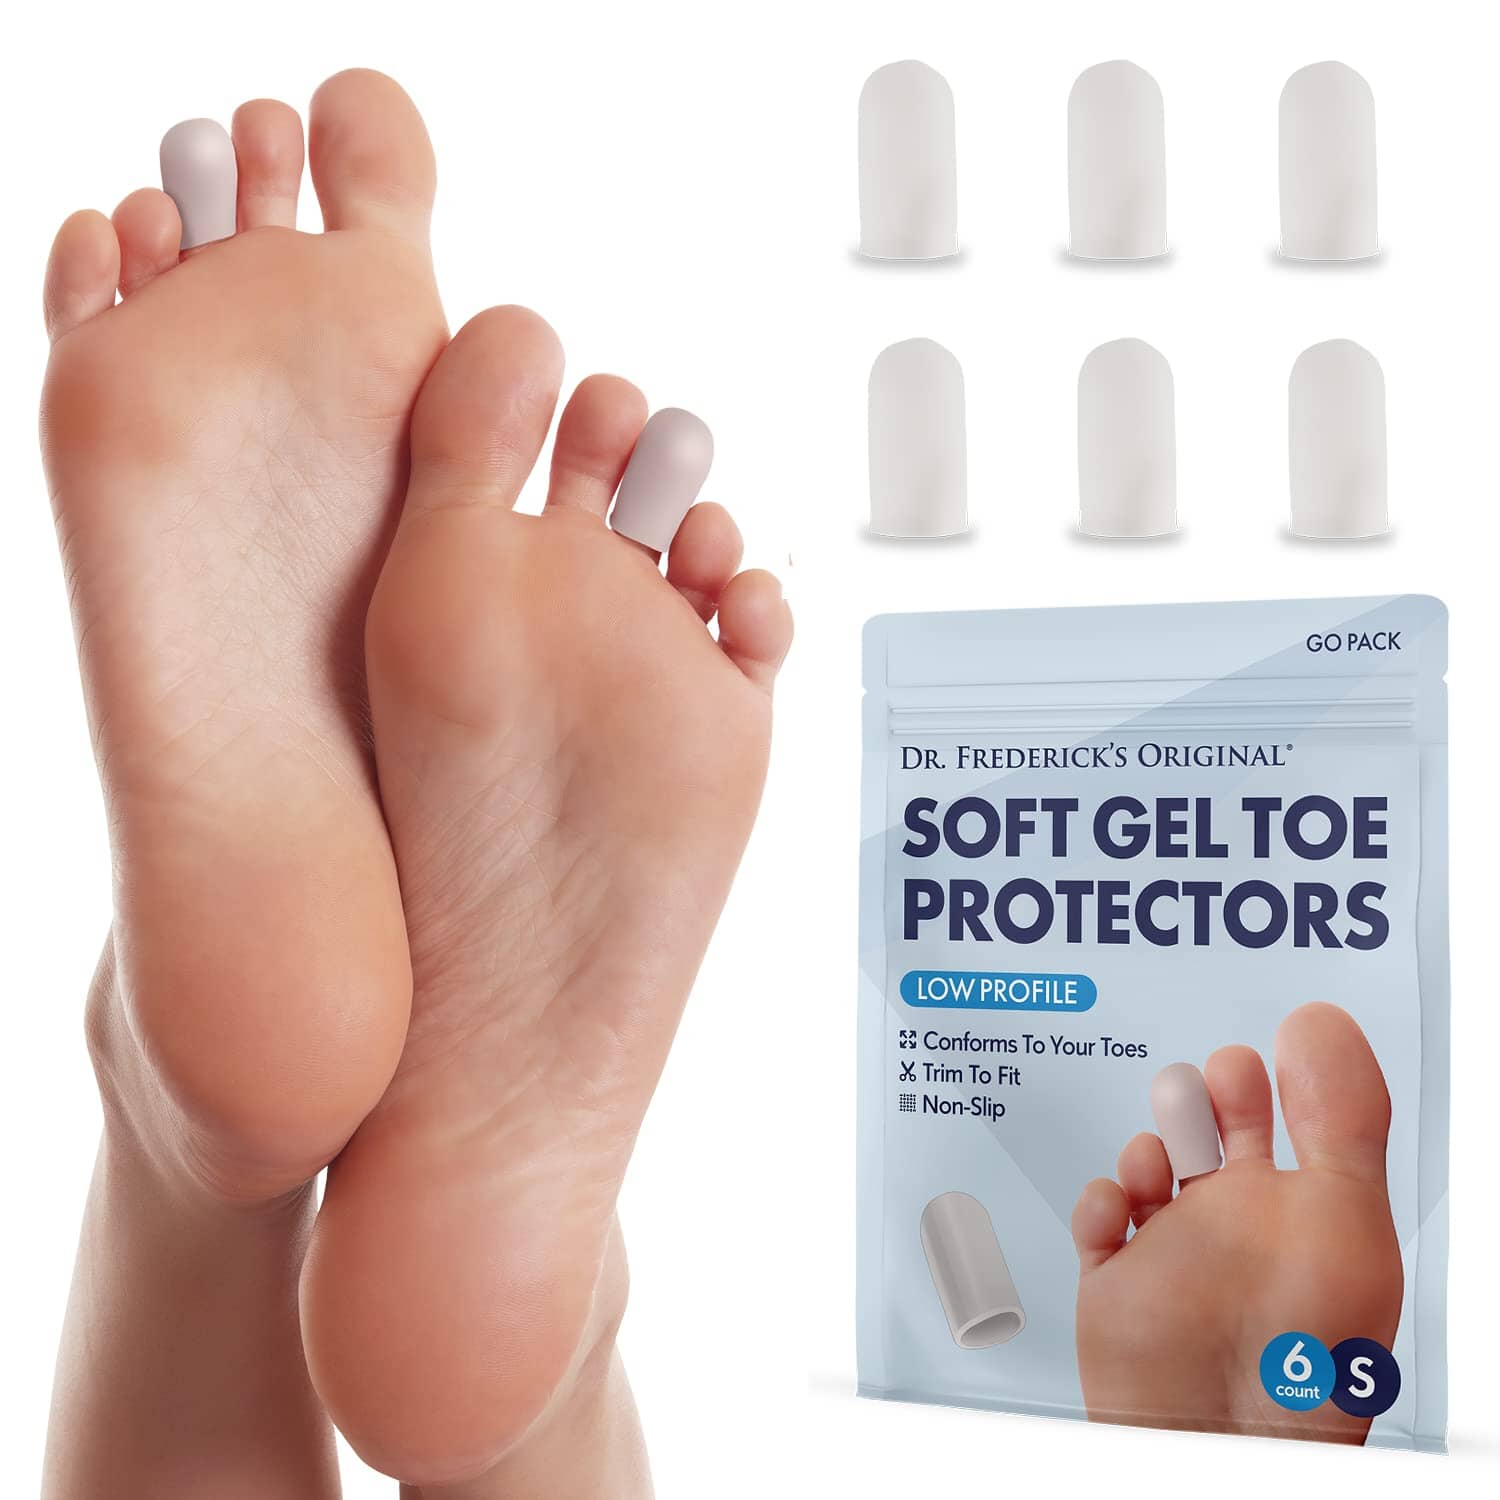 Dr. Frederick's Original Soft Gel Toe Protectors for Men & Women - 6 Pieces - Toe Caps for Foot Pain Relief - Flexible Cushions - Toe Sleeves for Ingrown Toenails, Corns, Calluses, Blisters - Small Foot Pain Dr. Frederick's Original 